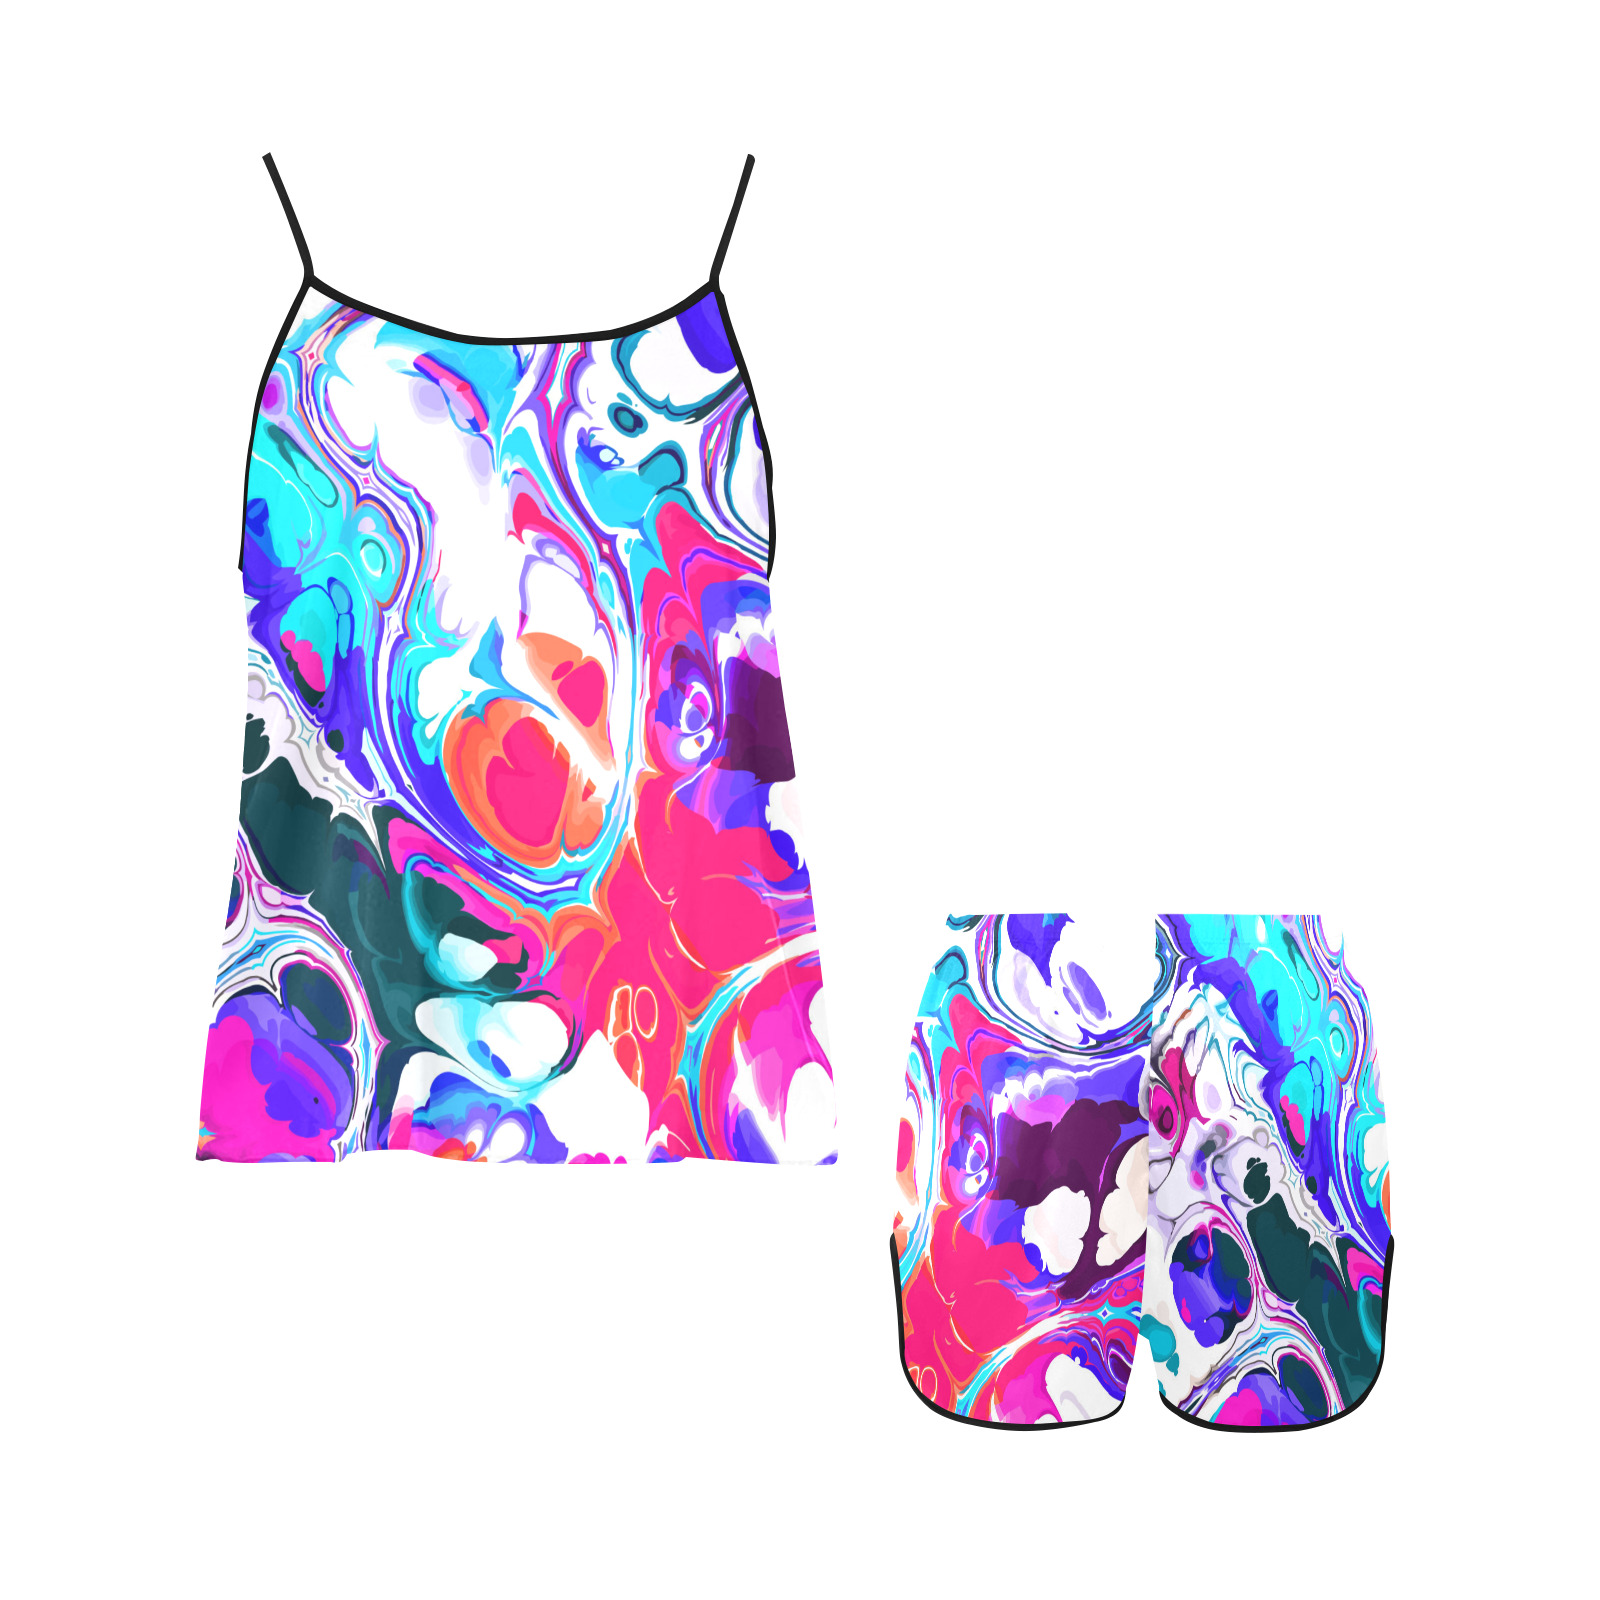 Blue White Pink Liquid Flowing Marbled Ink Abstract Women's Spaghetti Strap Short Pajama Set